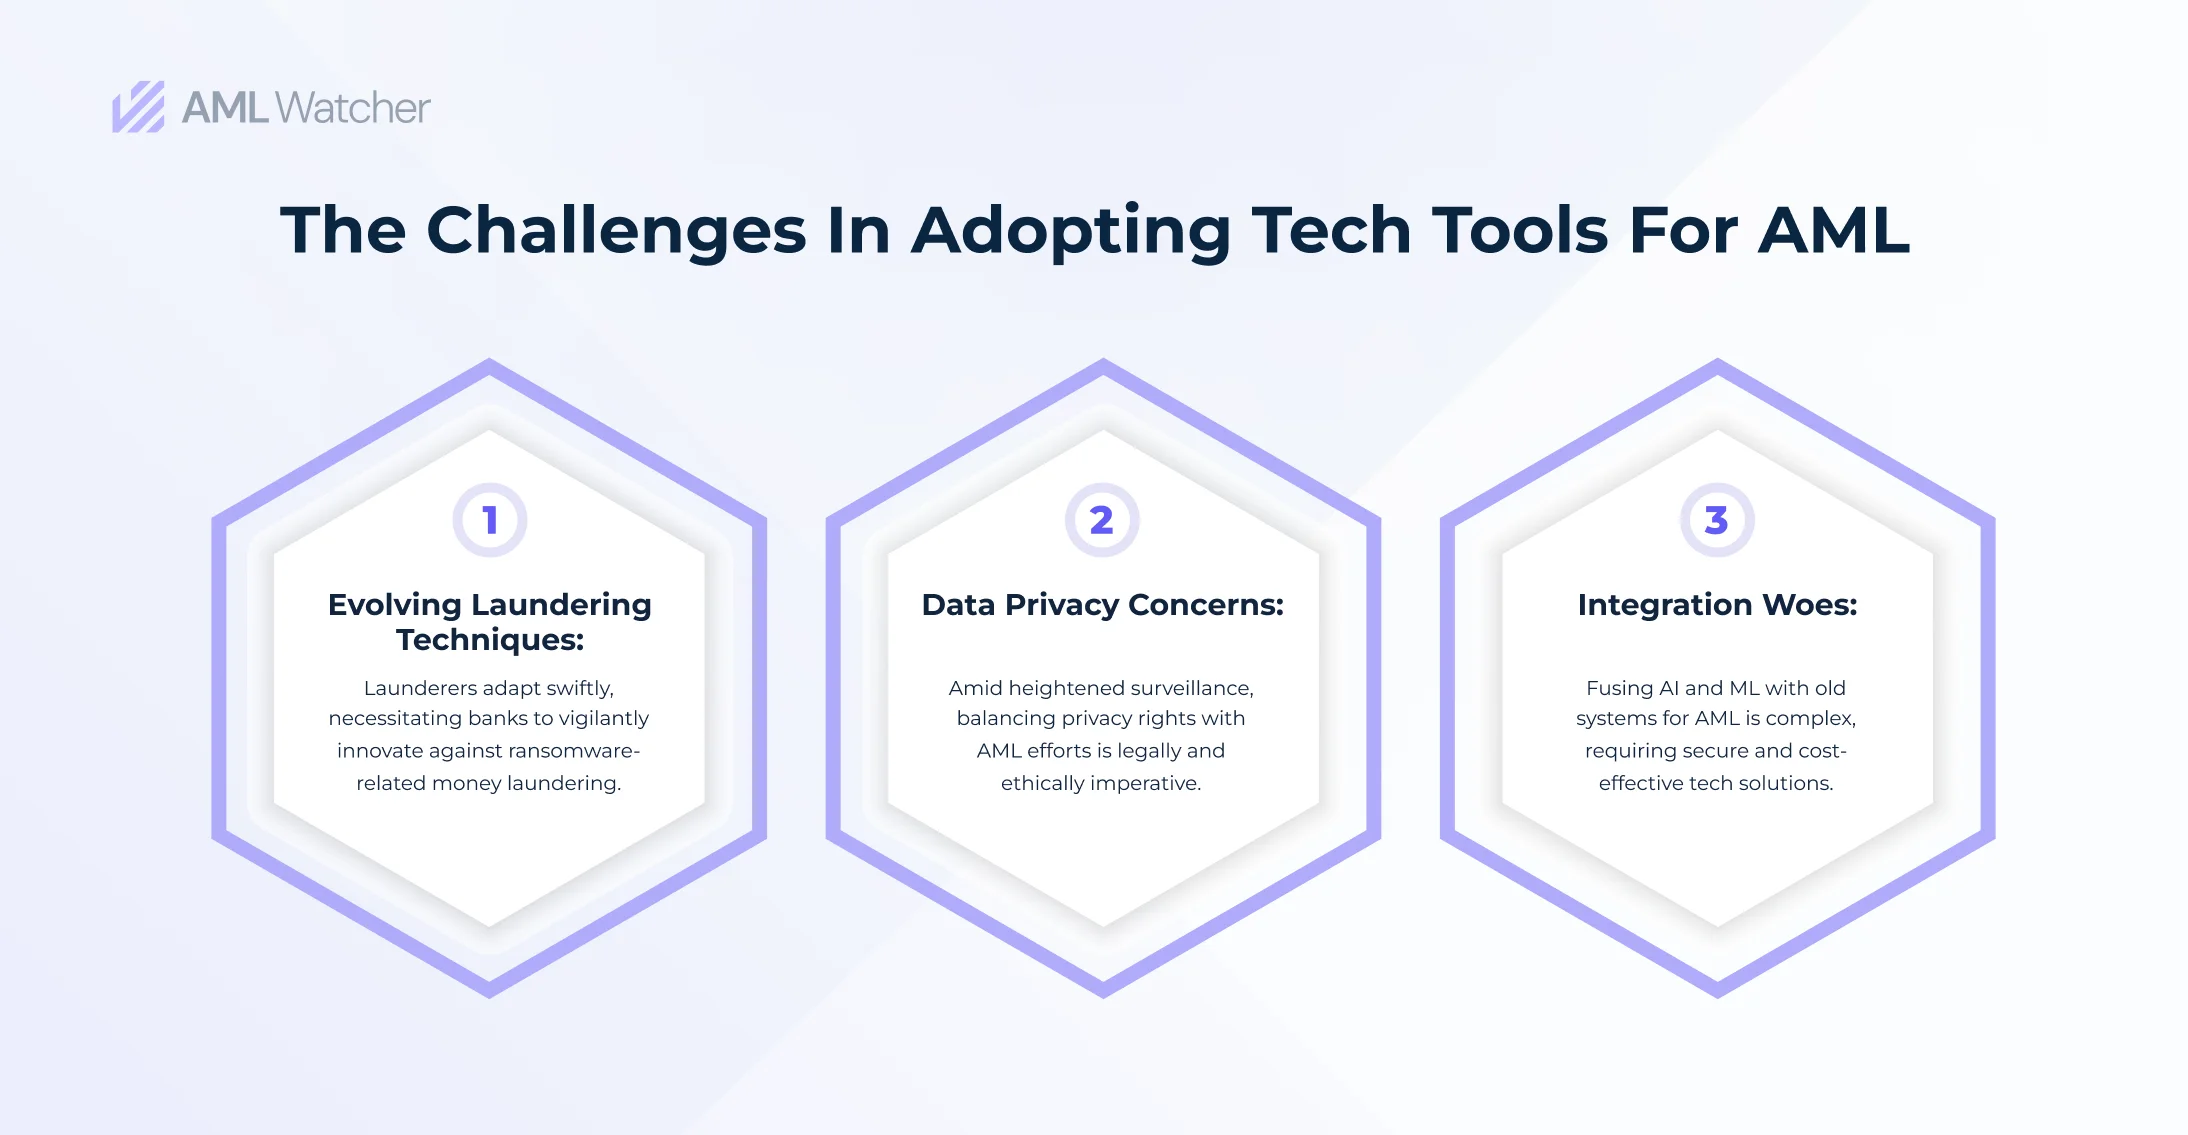 Addressing the resulting hurdles of tech integration, data privacy, and evolving crimes in modern AML strategies and technology.